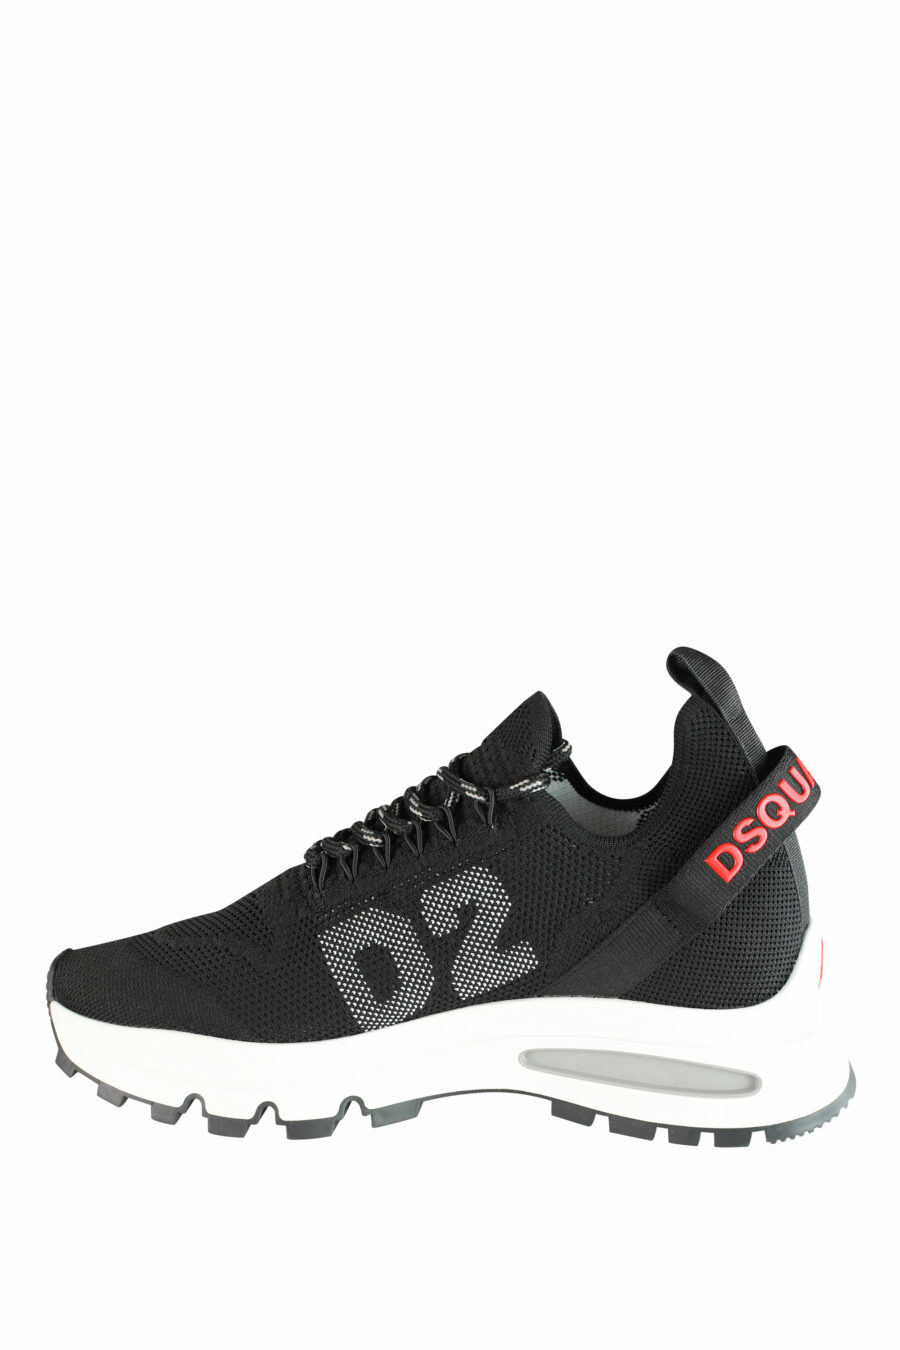 Black "Run D2" trainers with red logo - IMG 1416